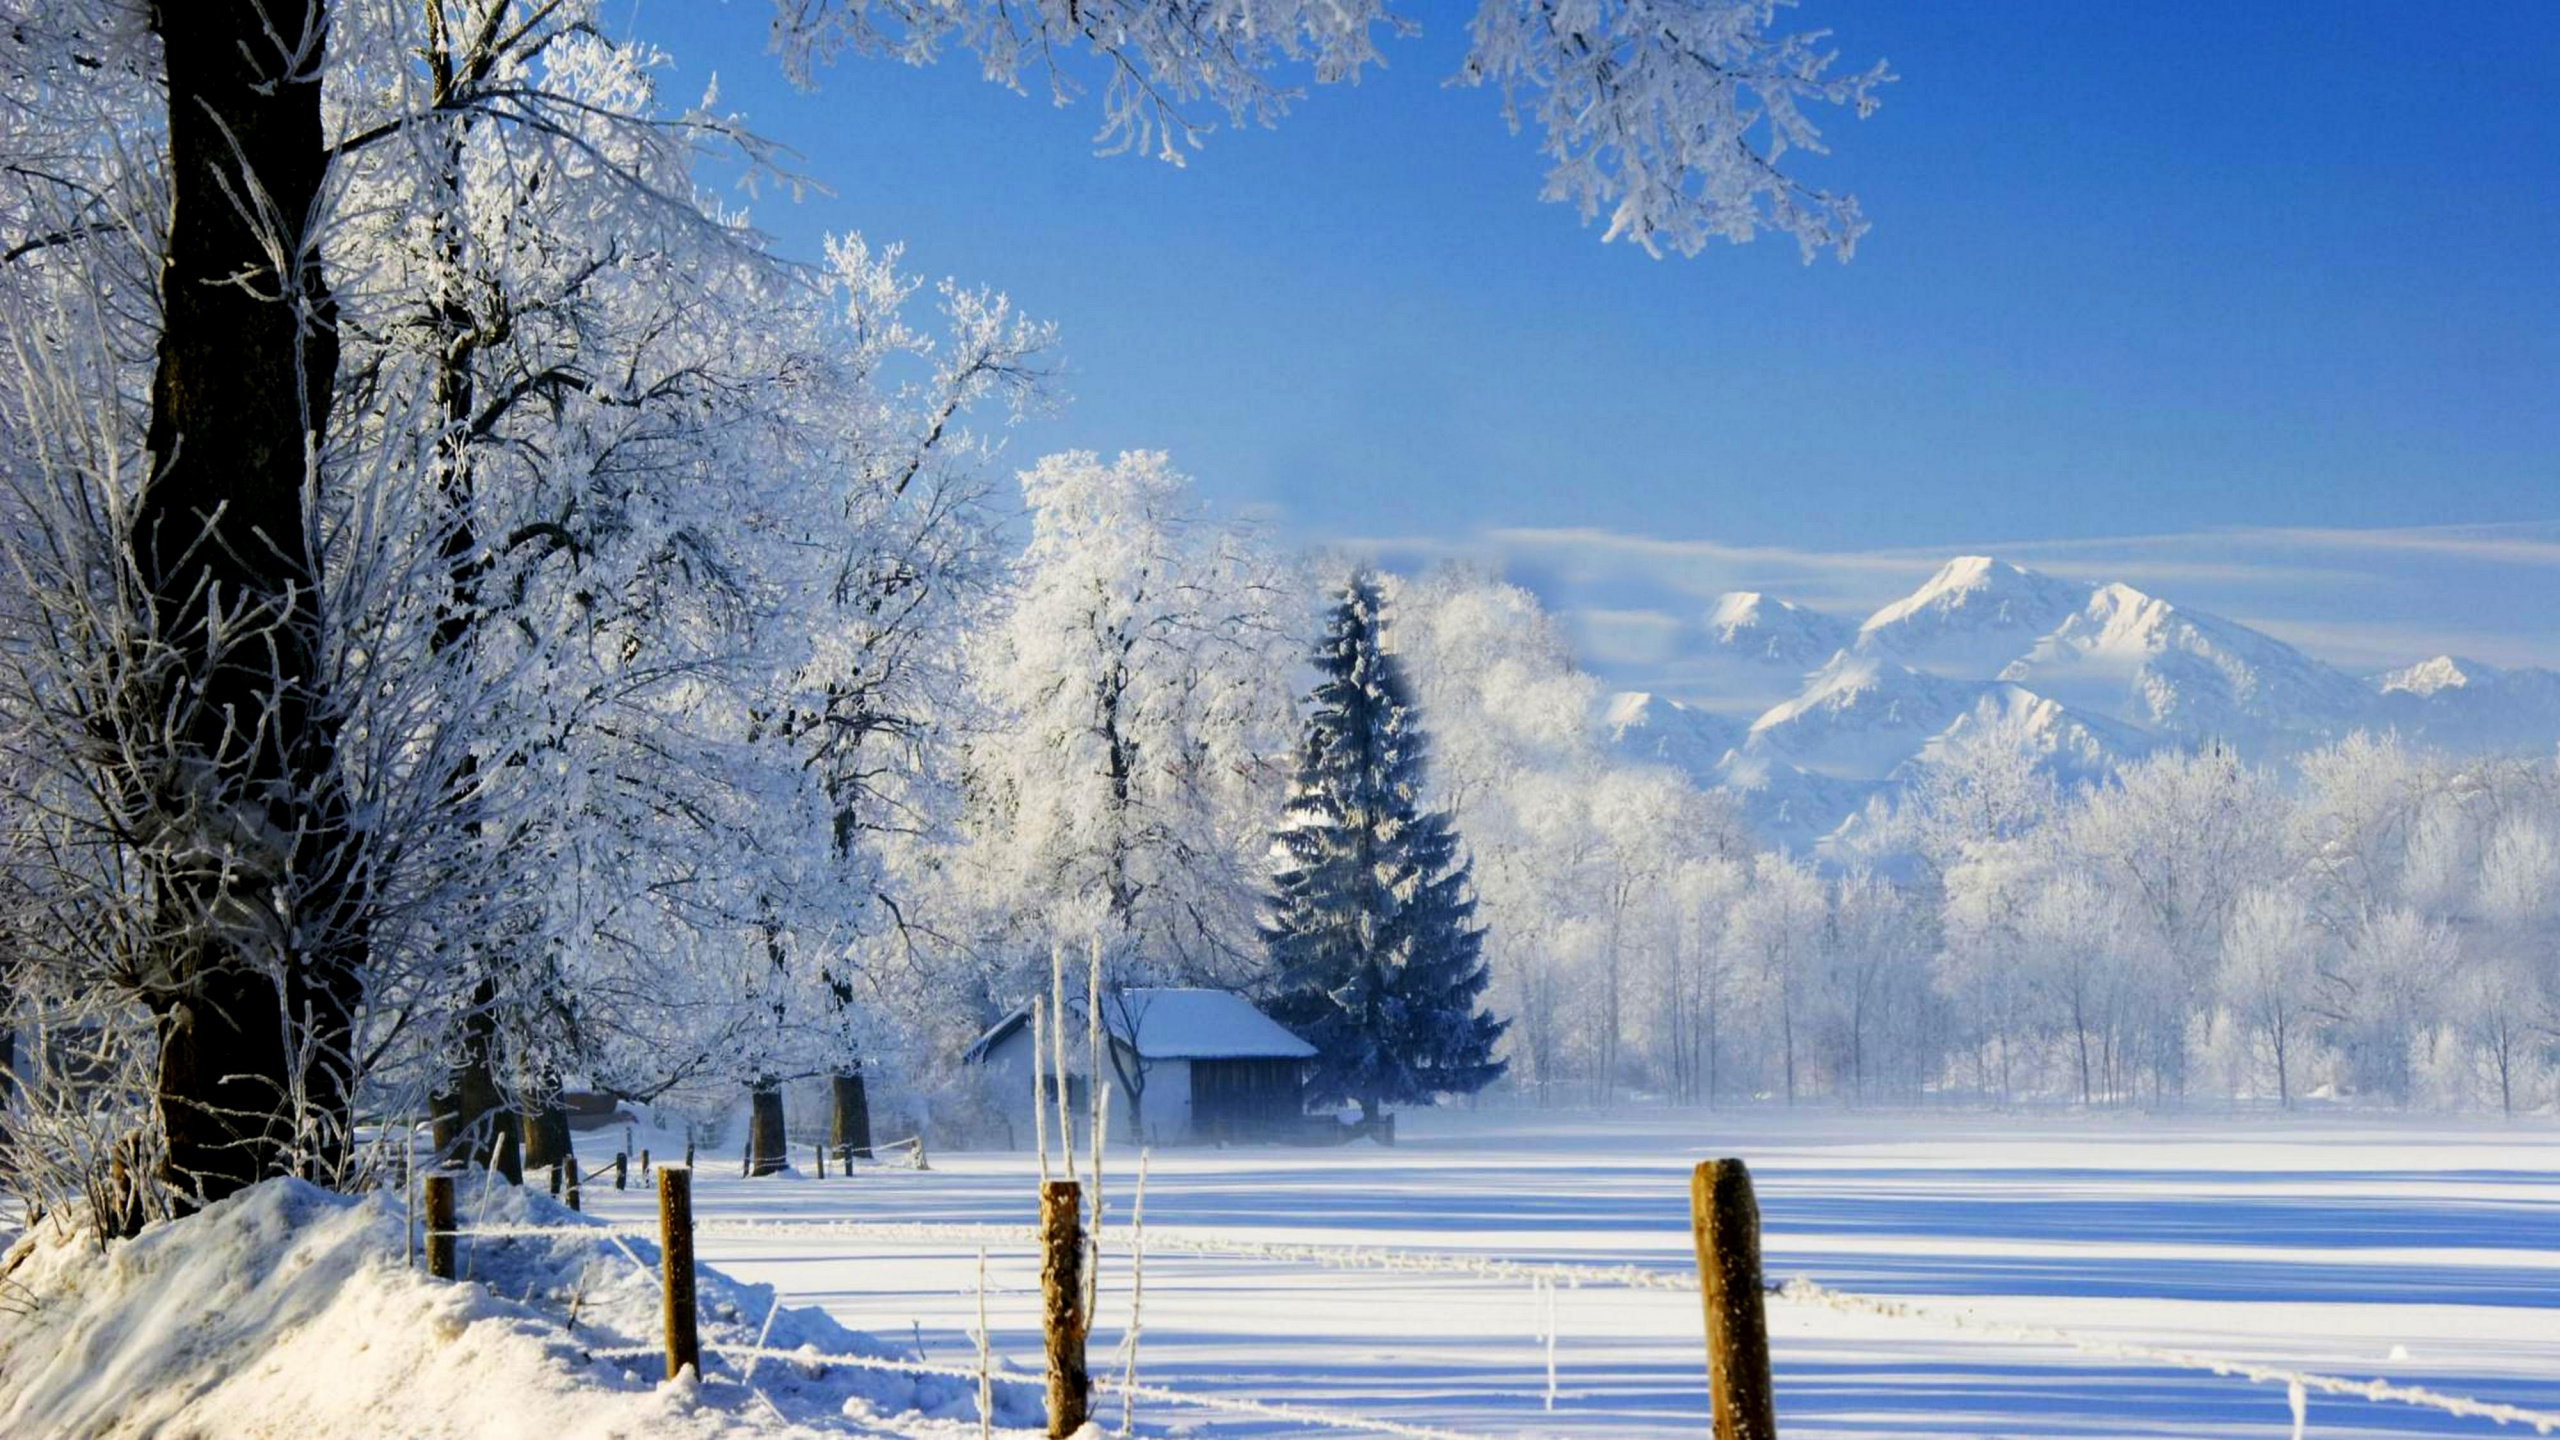 Snow Covered Trees and Mountains Under Blue Sky During Daytime. Wallpaper in 2560x1440 Resolution